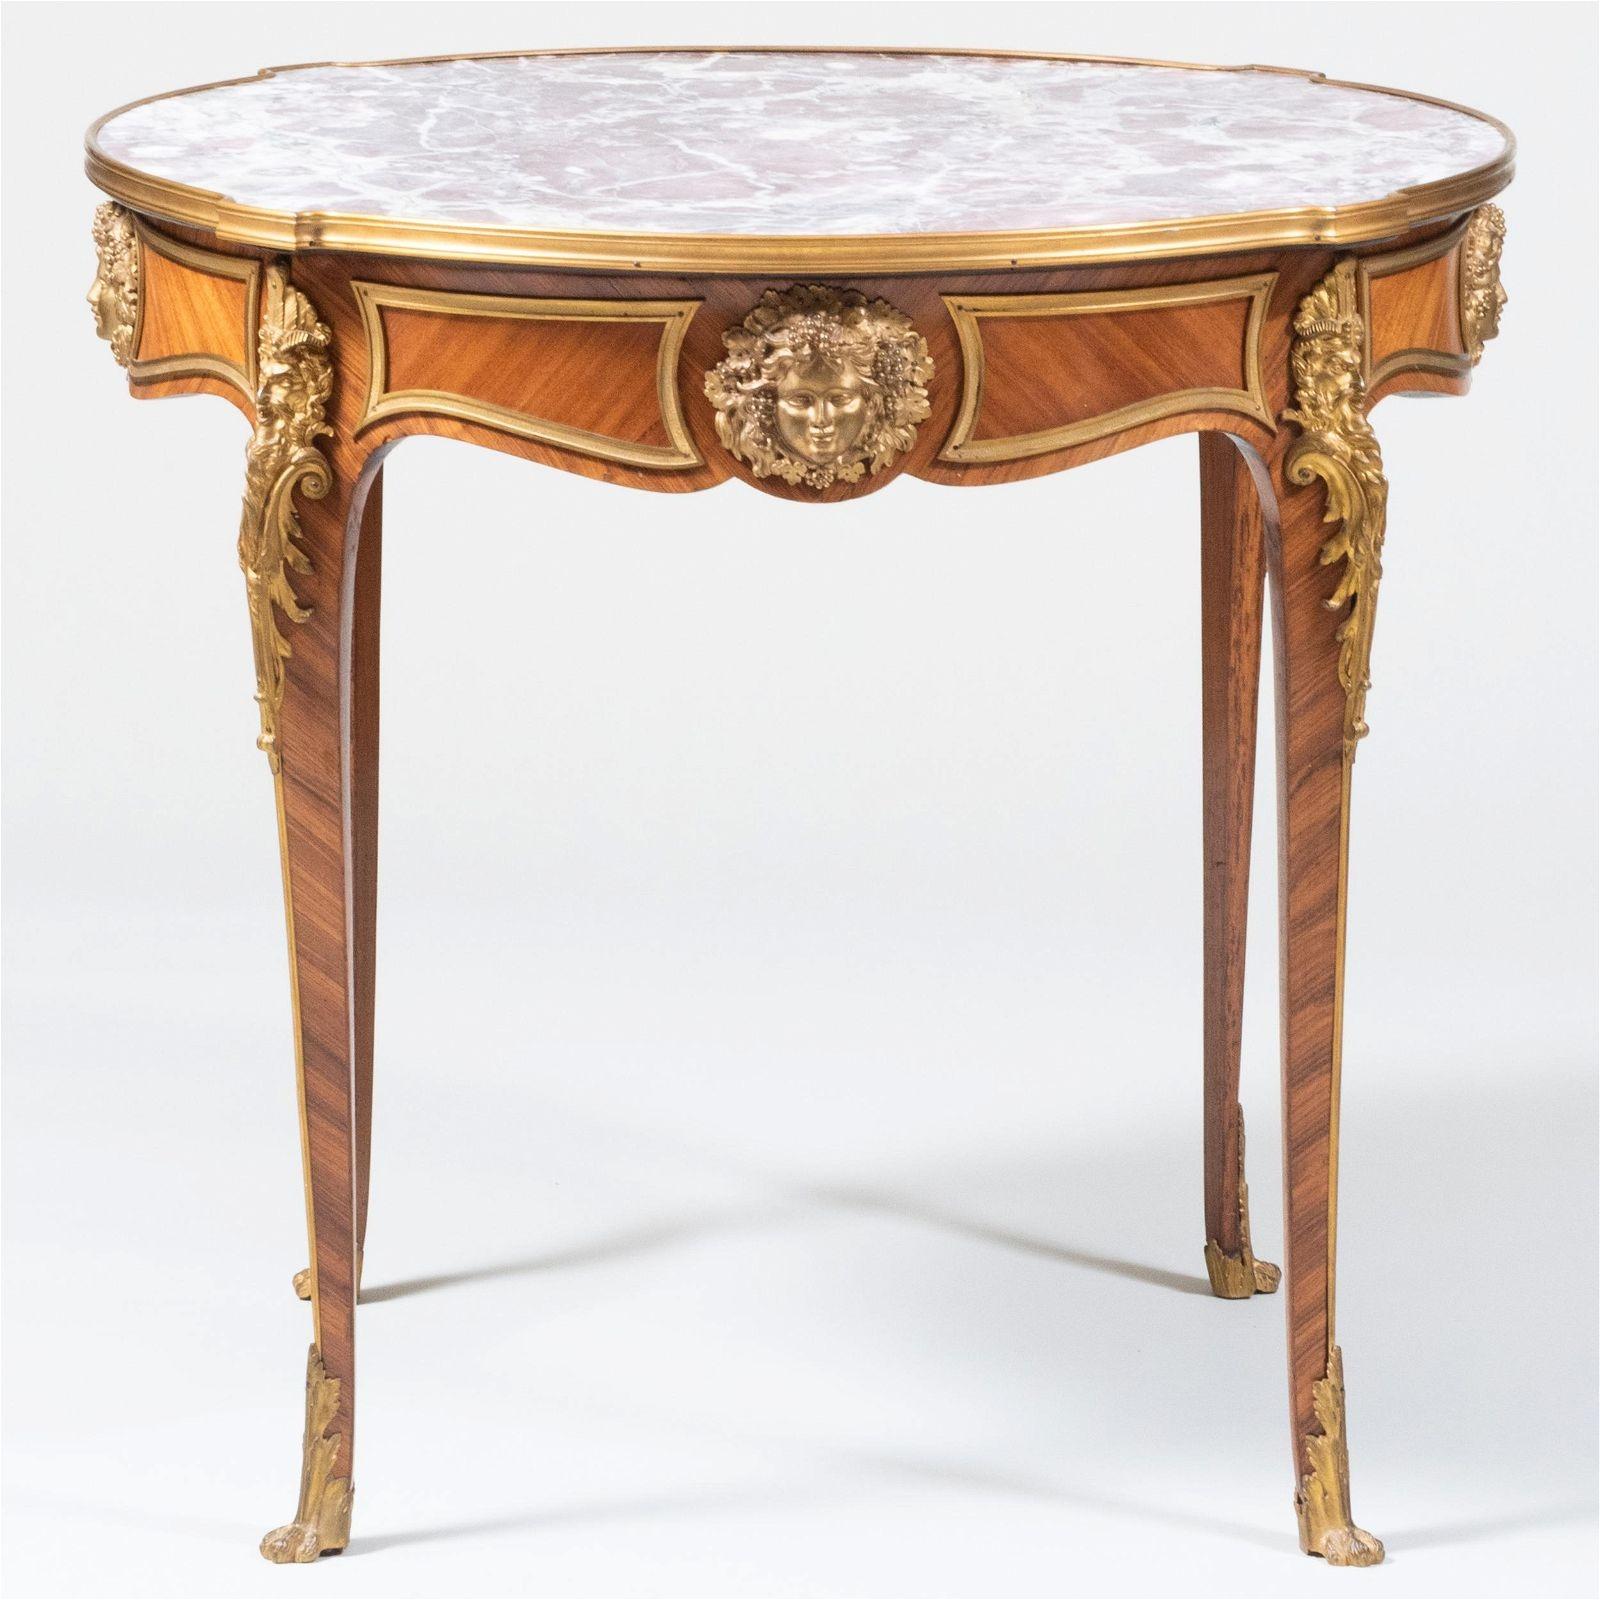 19th Century French Bronze Mounted Marble Top Center Table in Louis XV Style In Good Condition For Sale In New York, NY